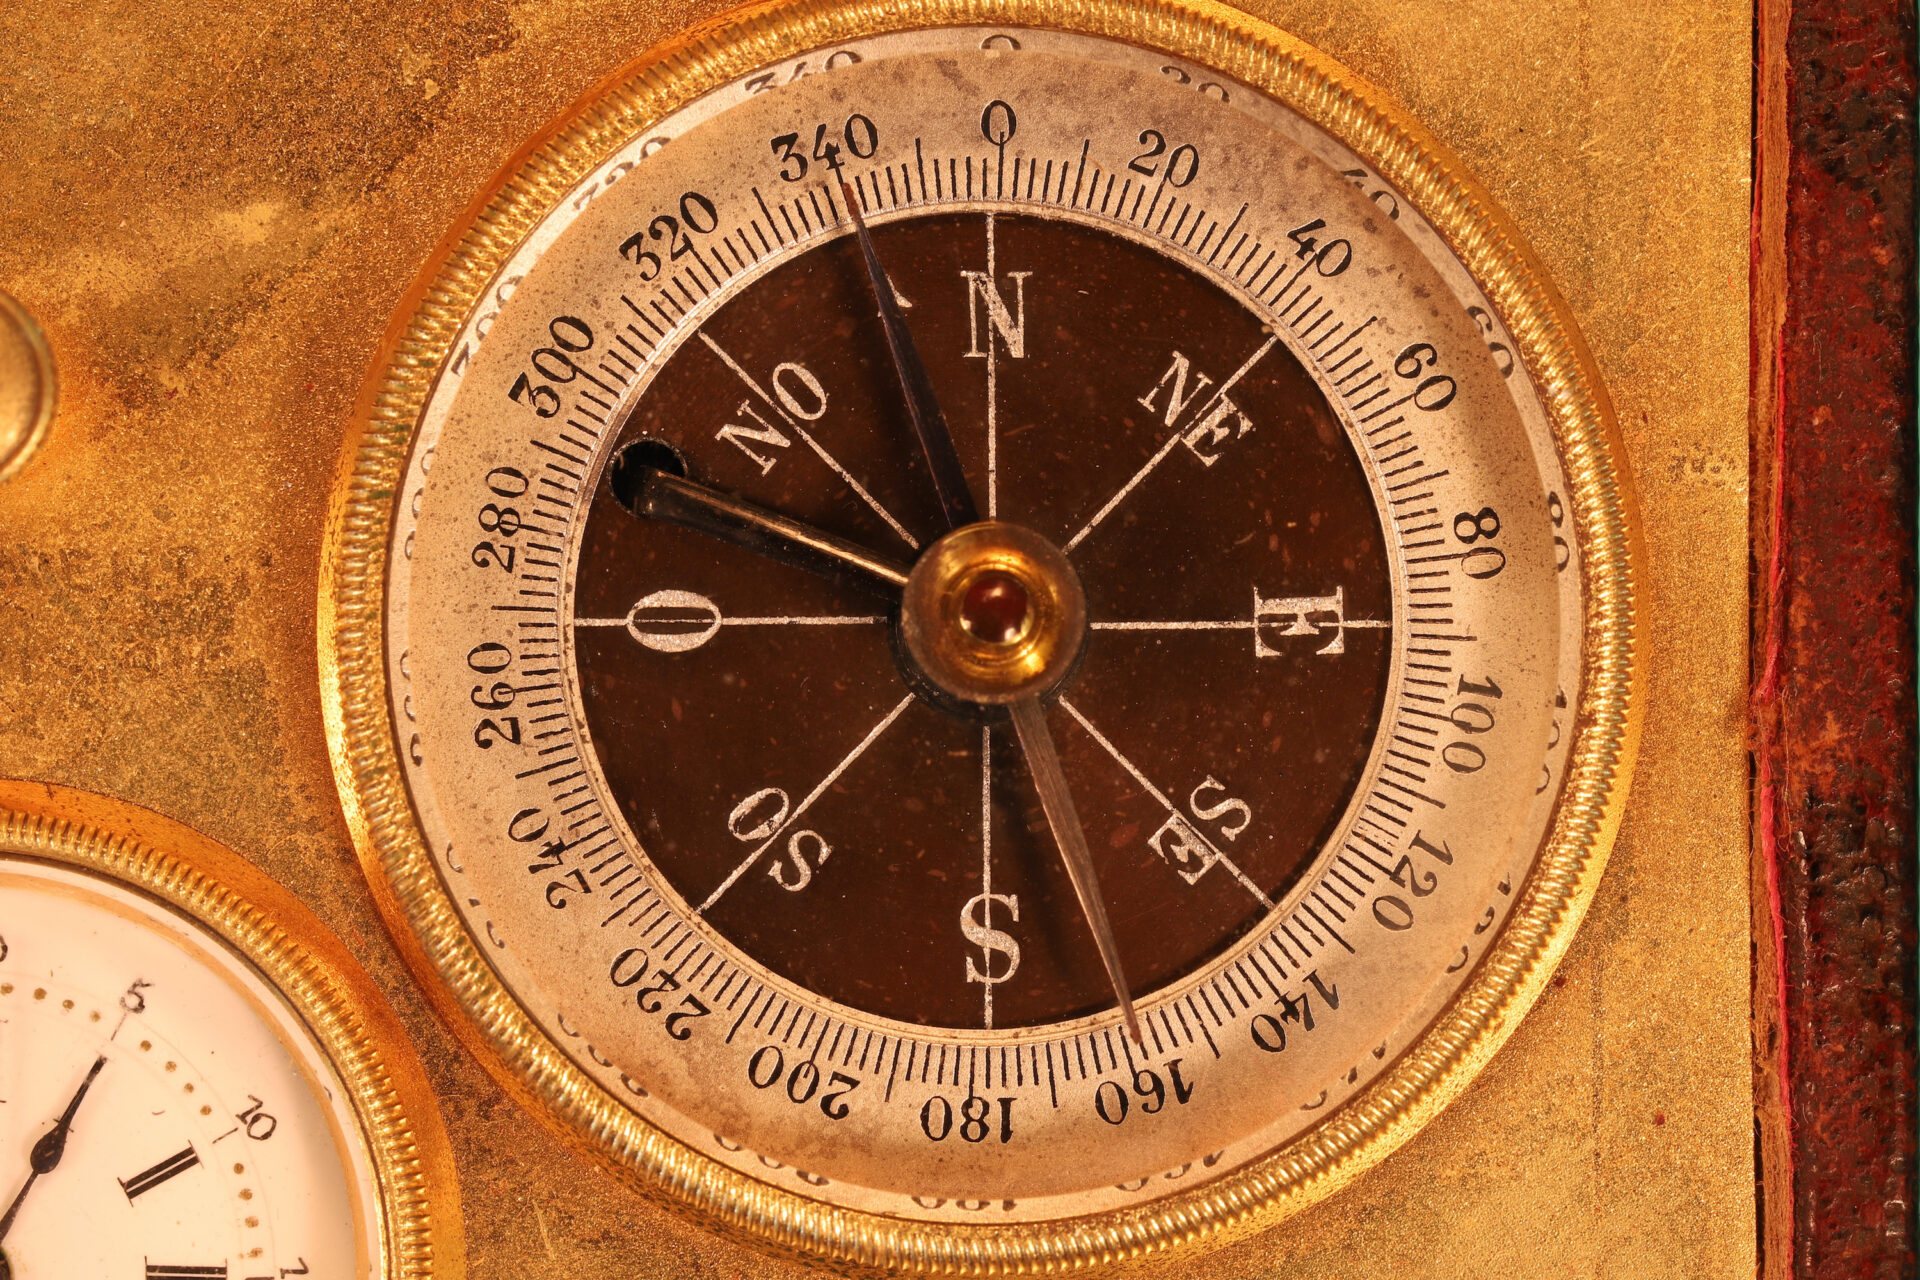 Close up of compass from French Travel Compendium Retailed by Hazebroucq c1900